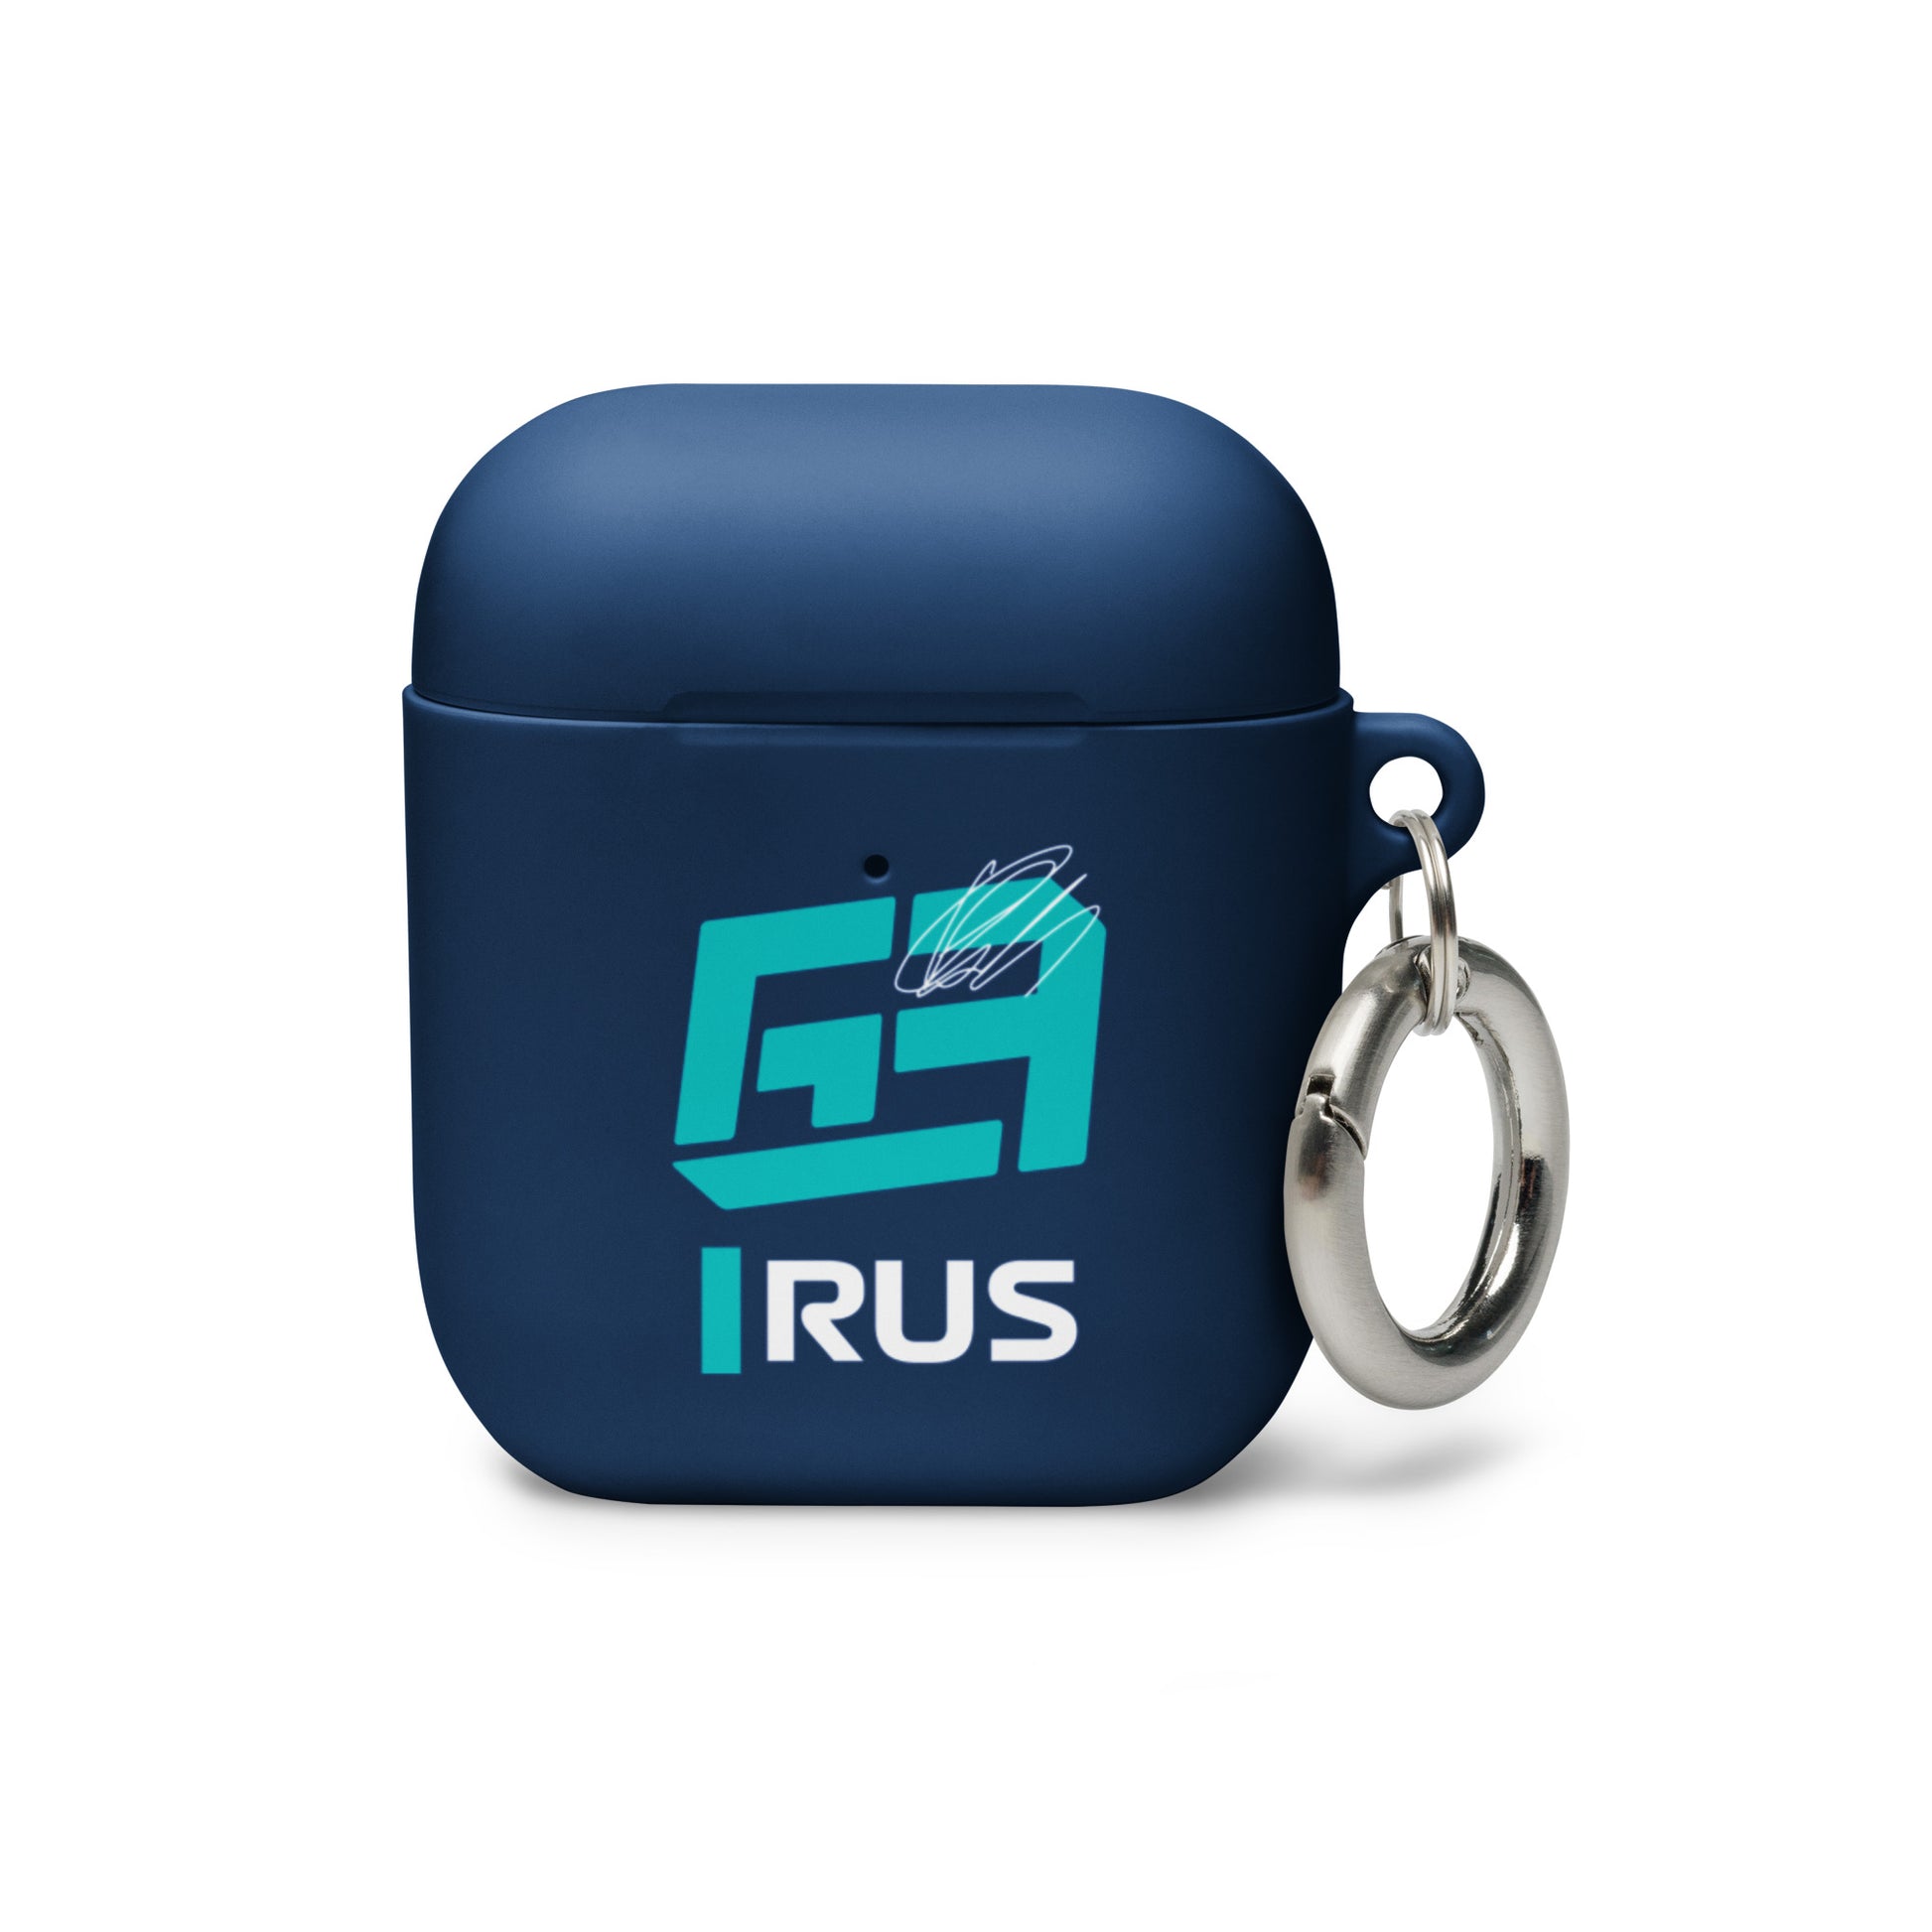 george russell airpods case navy blue